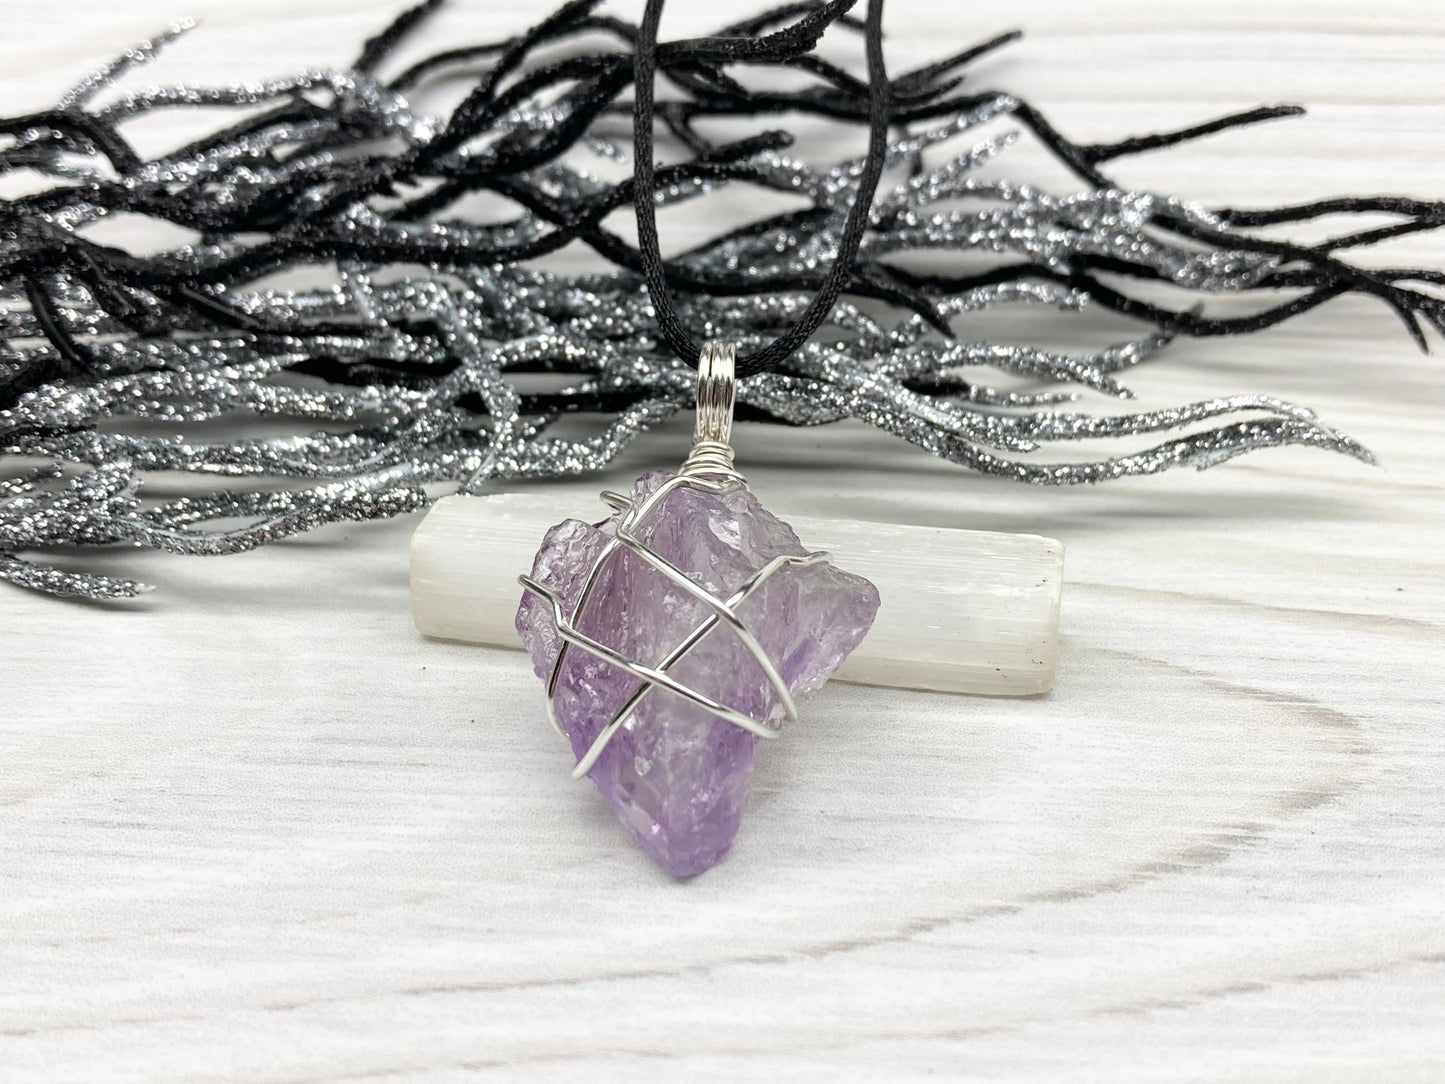 Raw Amethyst Necklace. Natural Amethyst Crystal Wrapped With Tarnish Resistant Silver Colored Copper Wire. Pendant Hangs On A Black Necklace. Handmade In Tennessee.